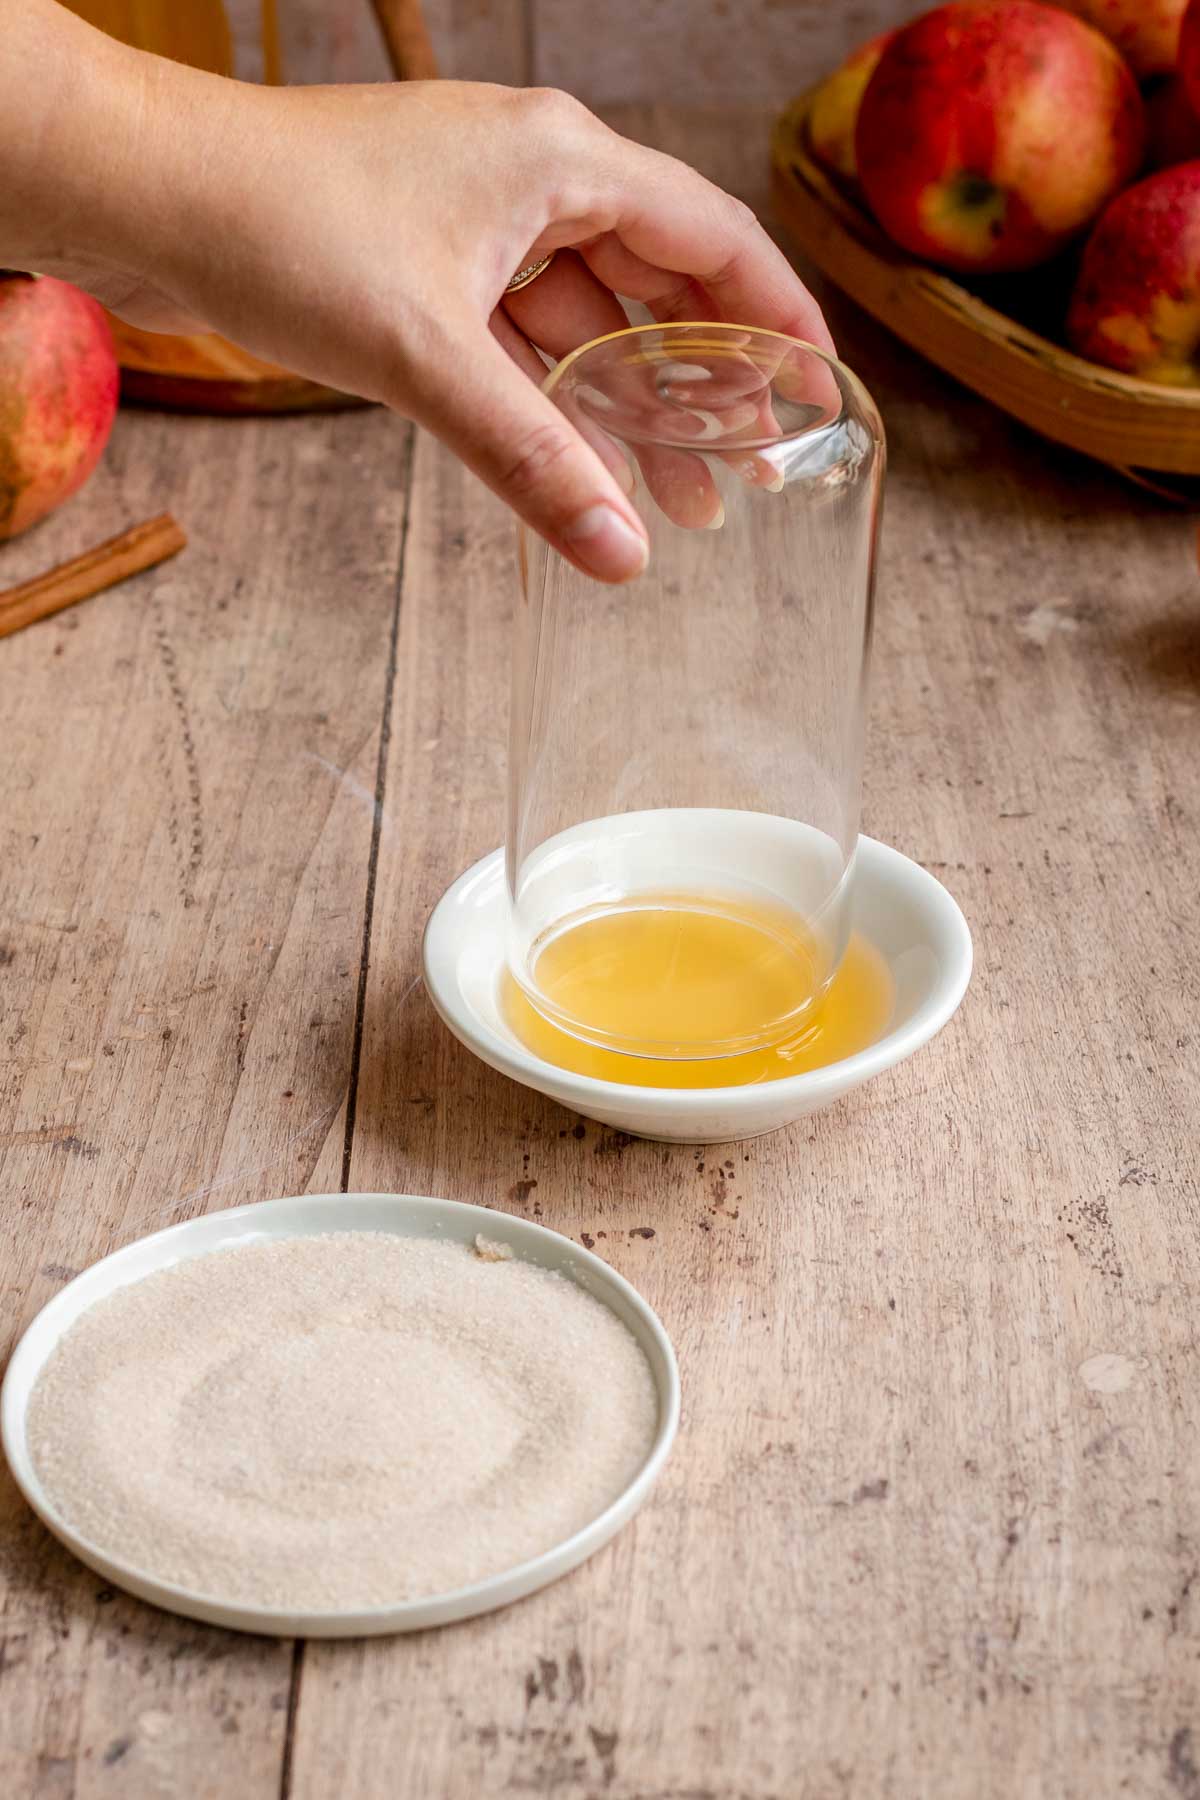 A hand dips the rim of a glass off into apple cider.